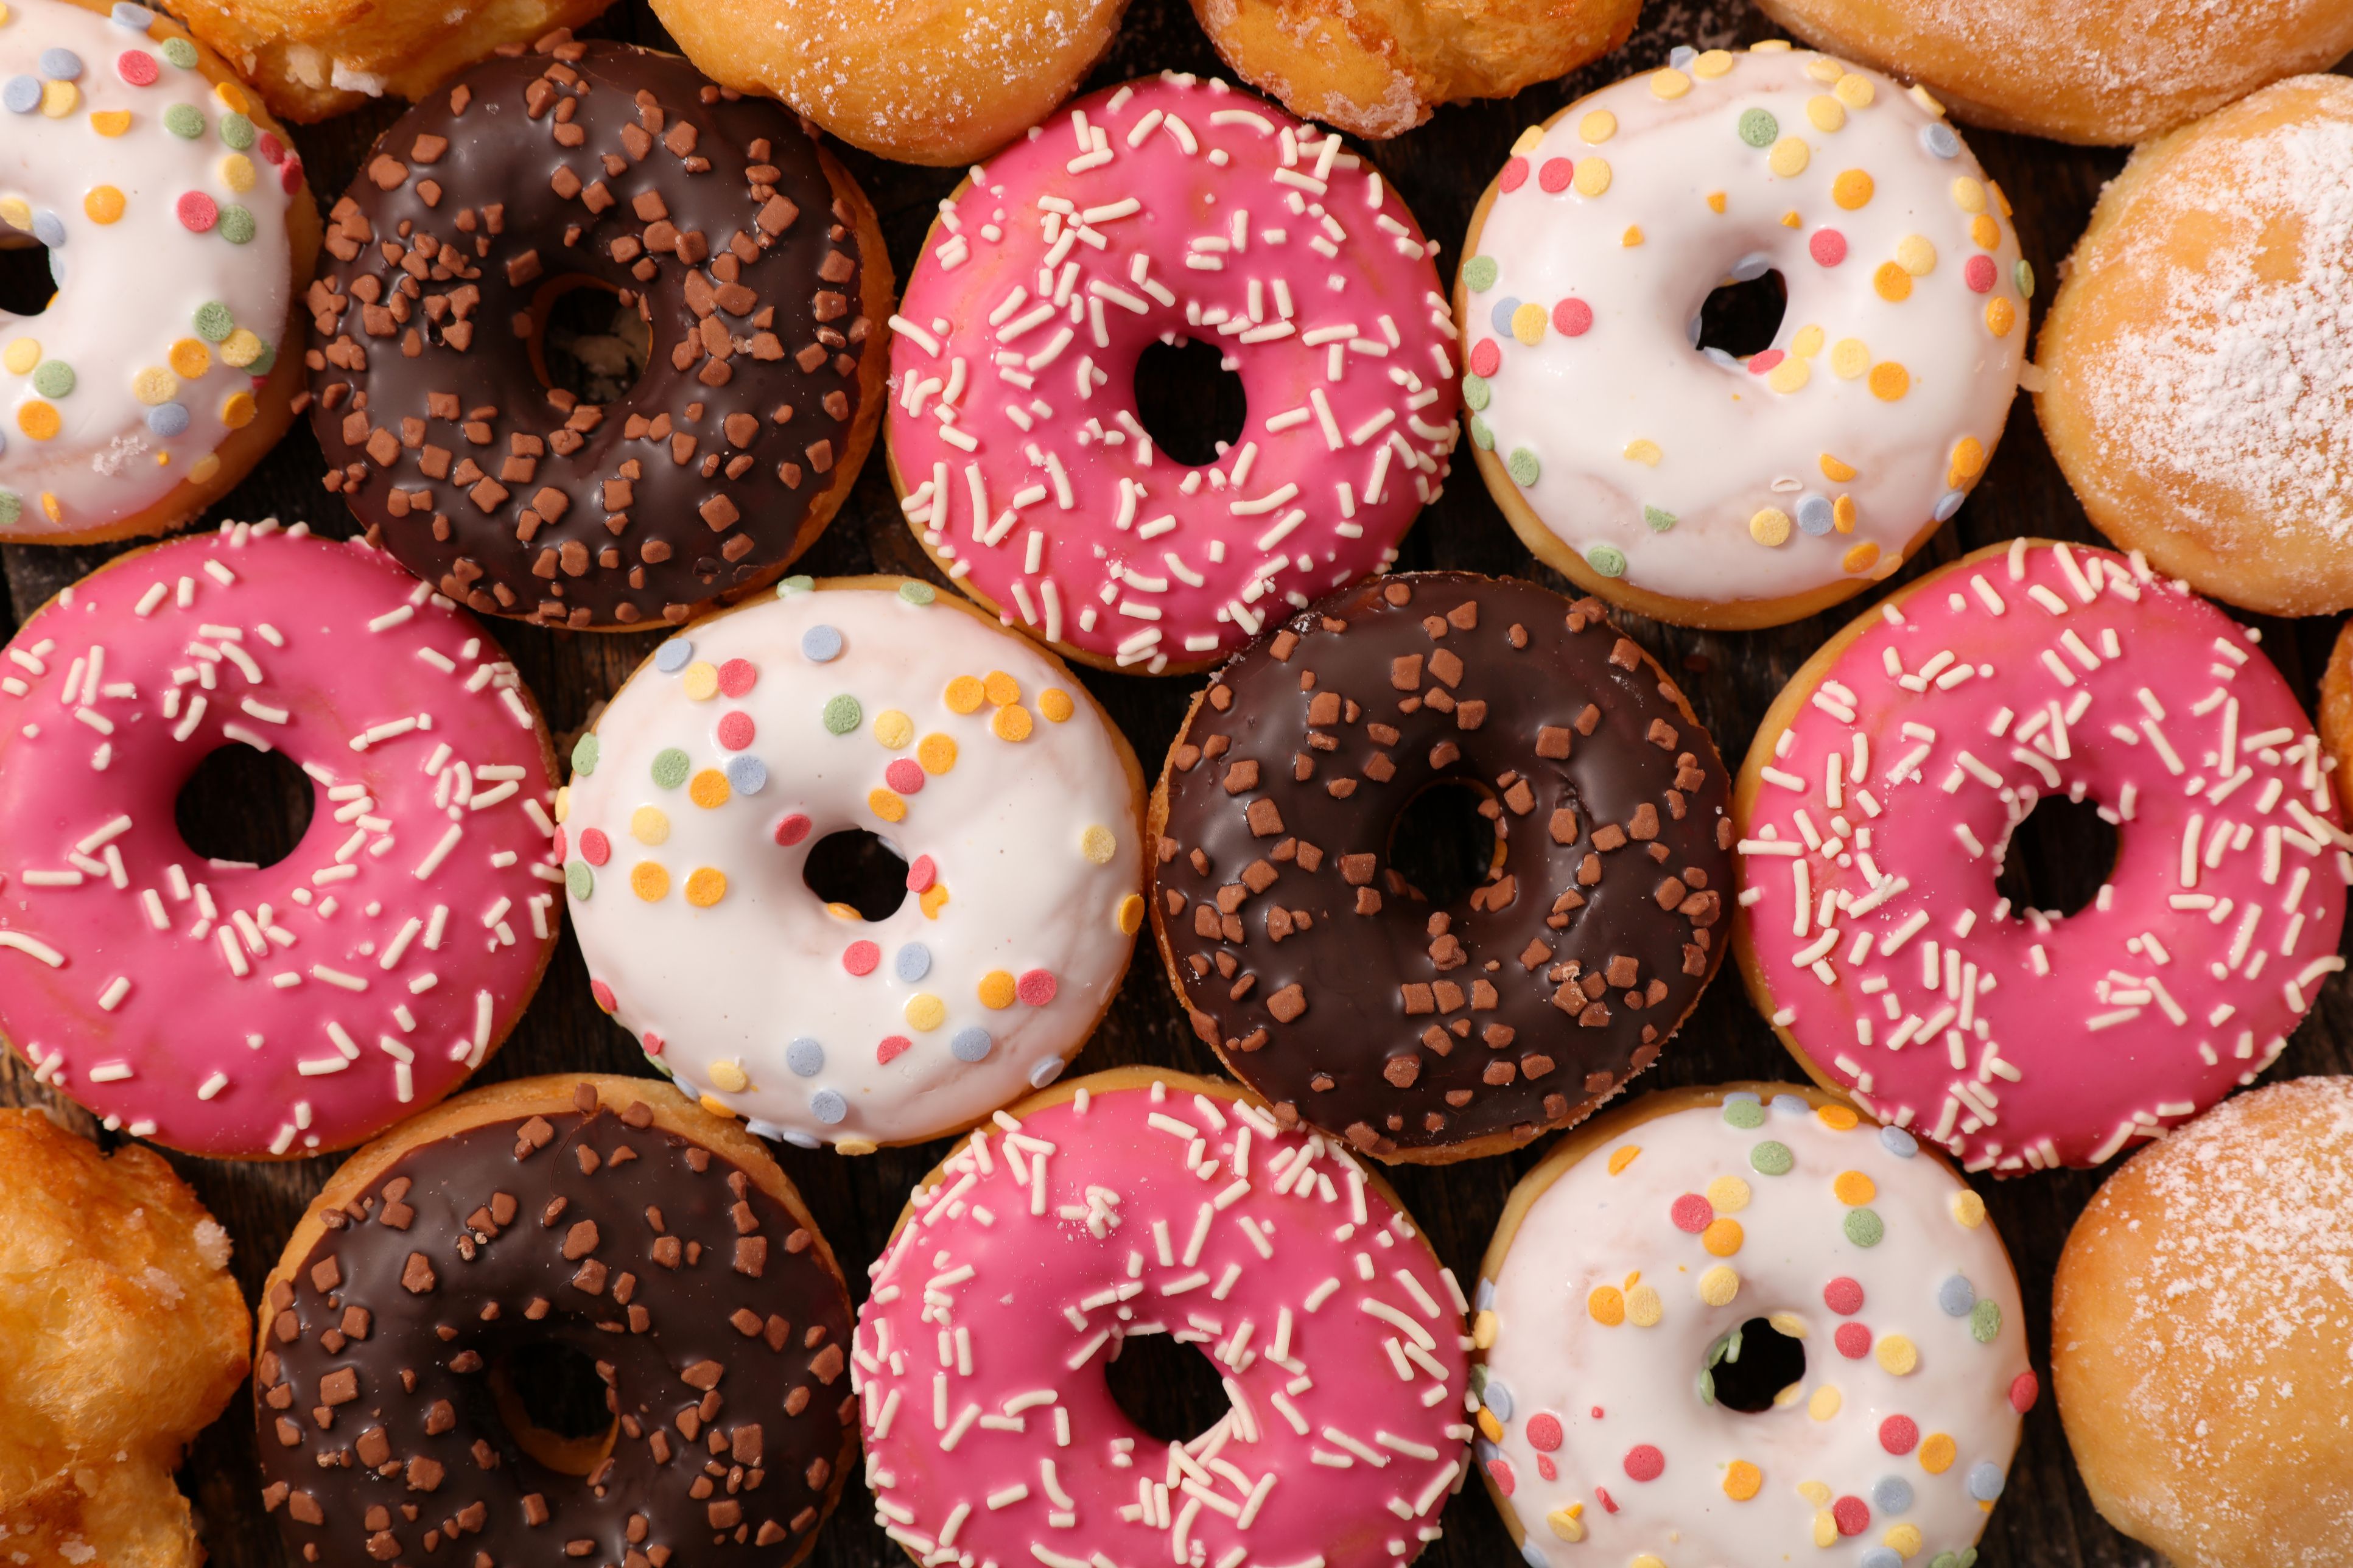 8 Reasons Why You Should Never Ever Eat Donuts